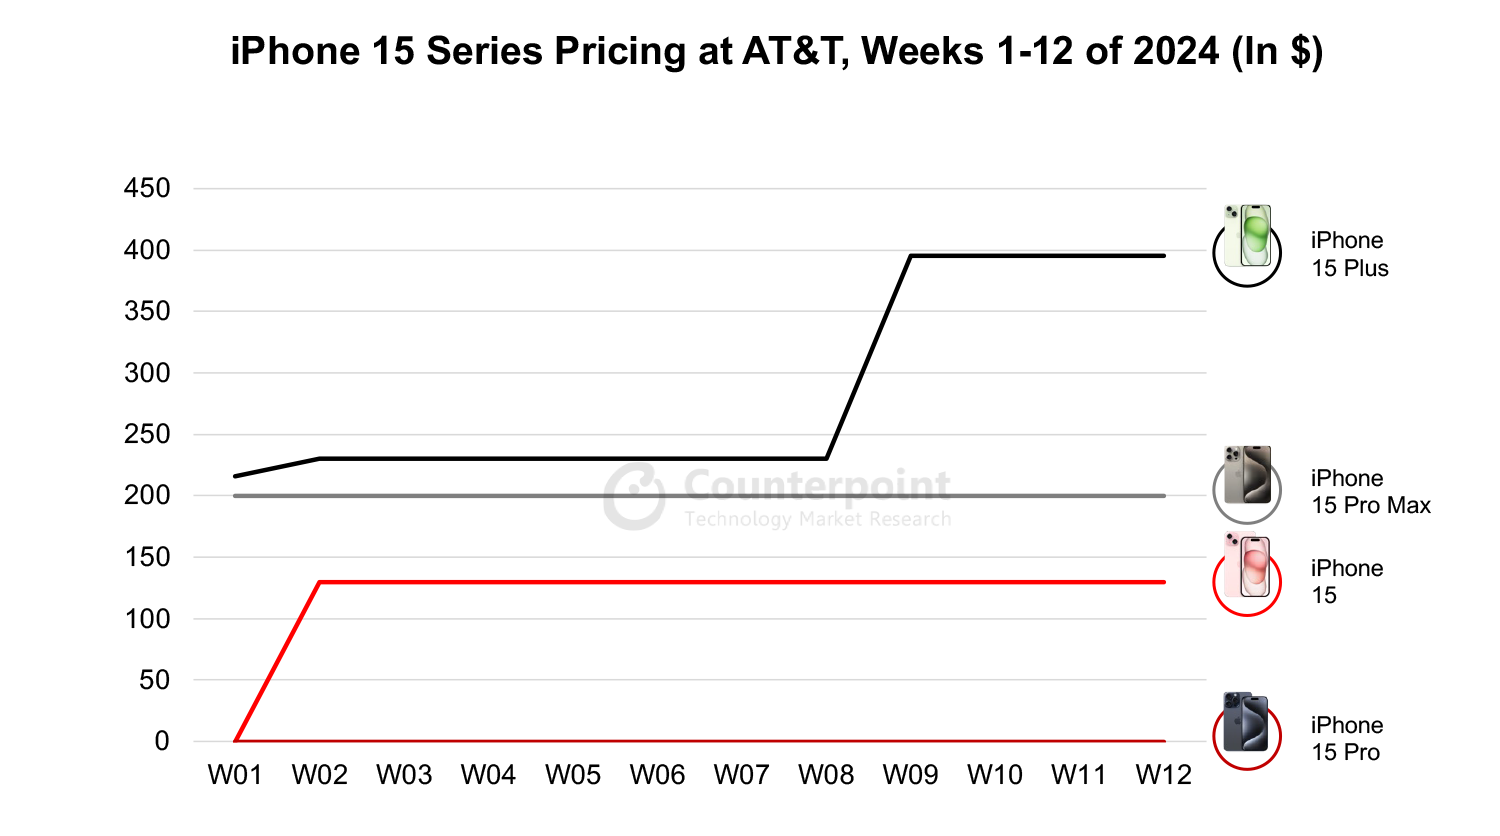 iPhone 15 Series Pricing at AT&T, Weeks 1-12 of 2024 (In $)